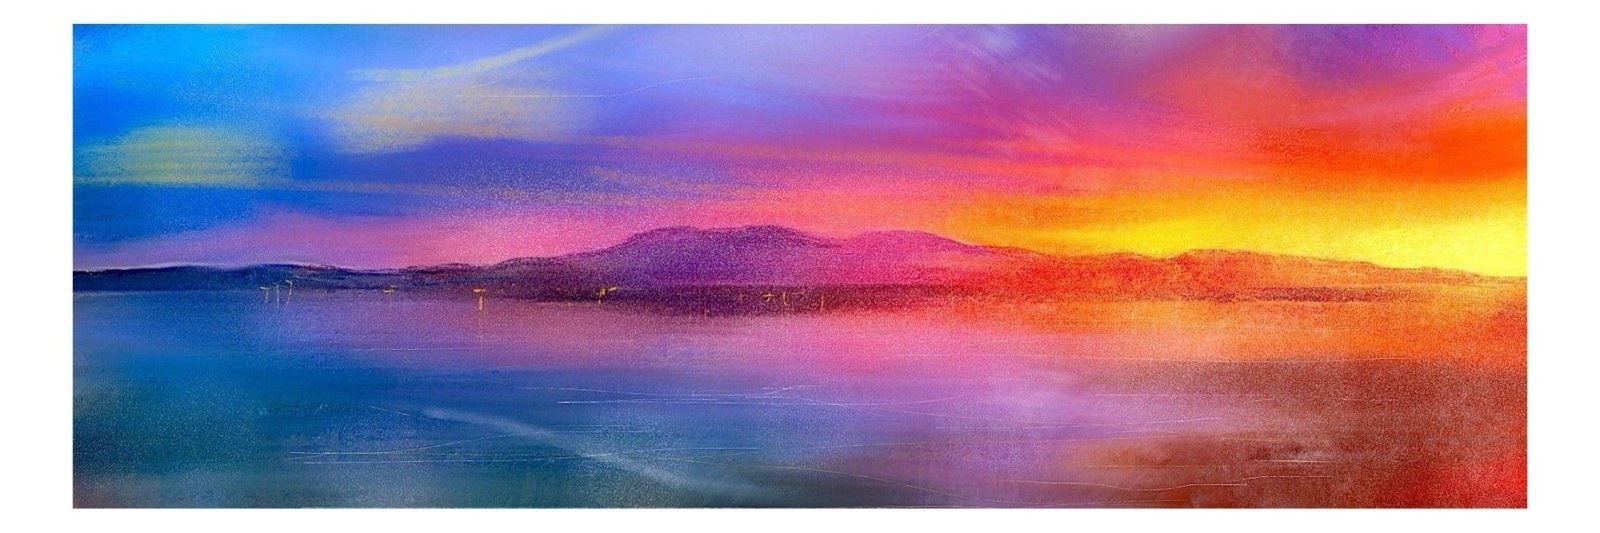 Arran Sunset-Panoramic Prints-Arran Art Gallery-Paintings, Prints, Homeware, Art Gifts From Scotland By Scottish Artist Kevin Hunter